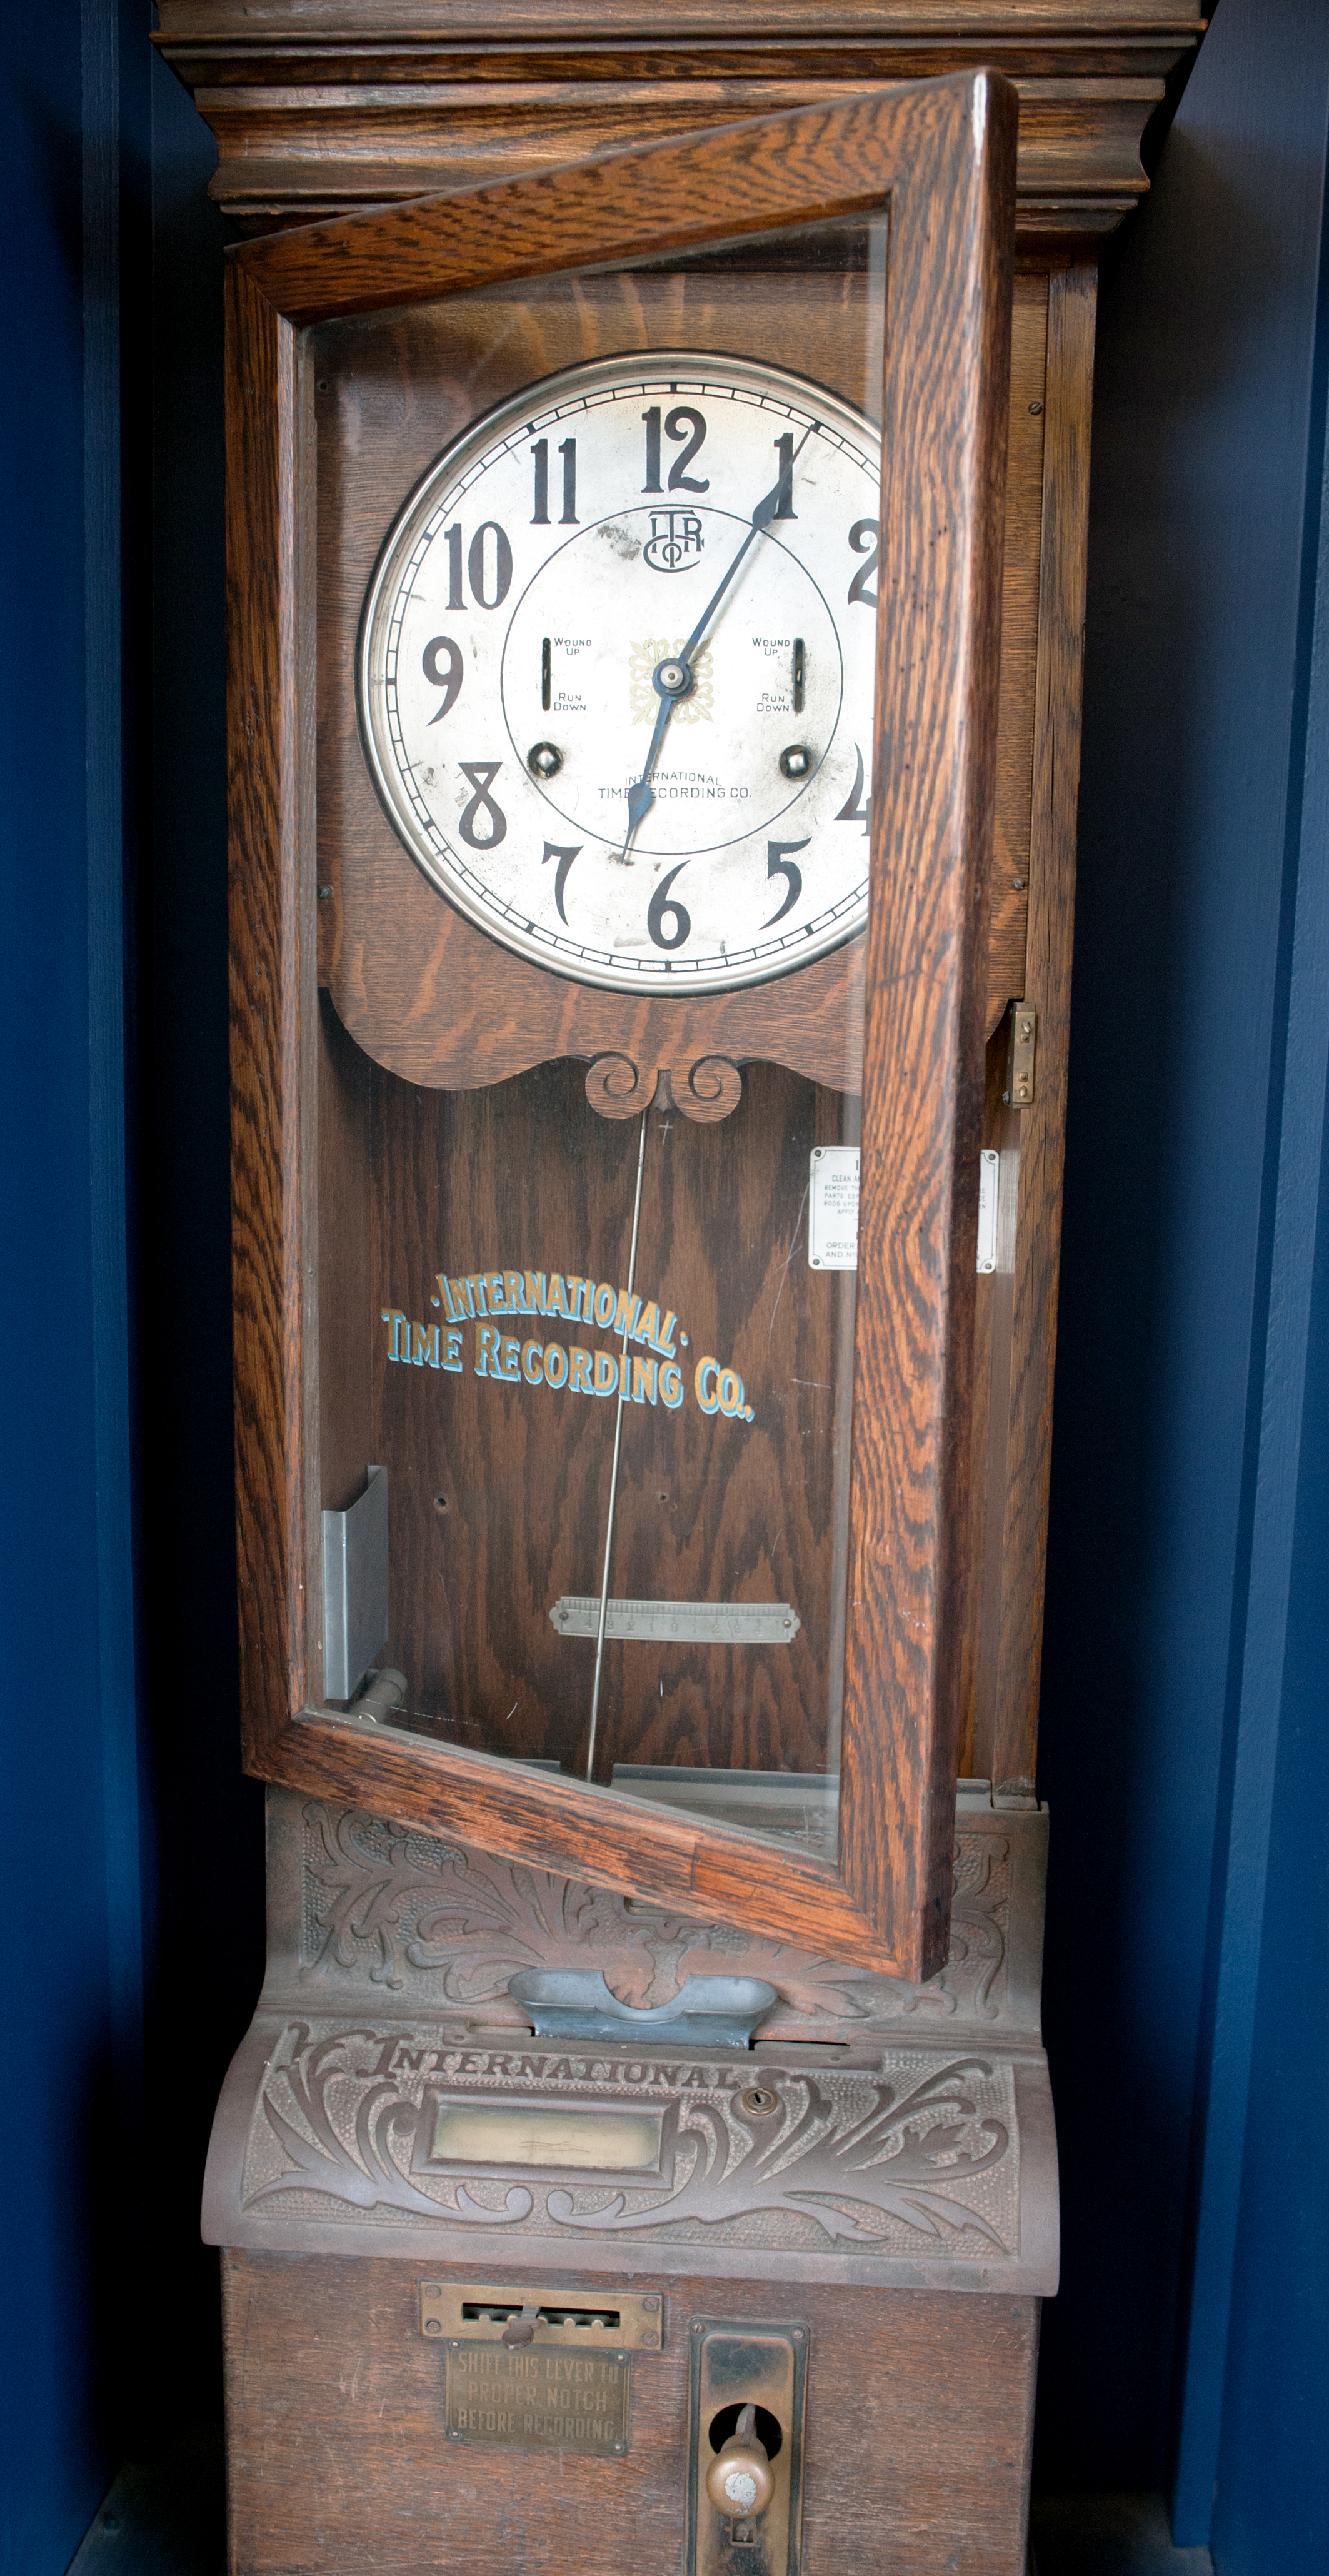 A wall mounted wooden cabinet clock that includes slots for tickets and a punch leaver. The lever must be shifted to record the time on the punch slips – the lever rests in the upright position.